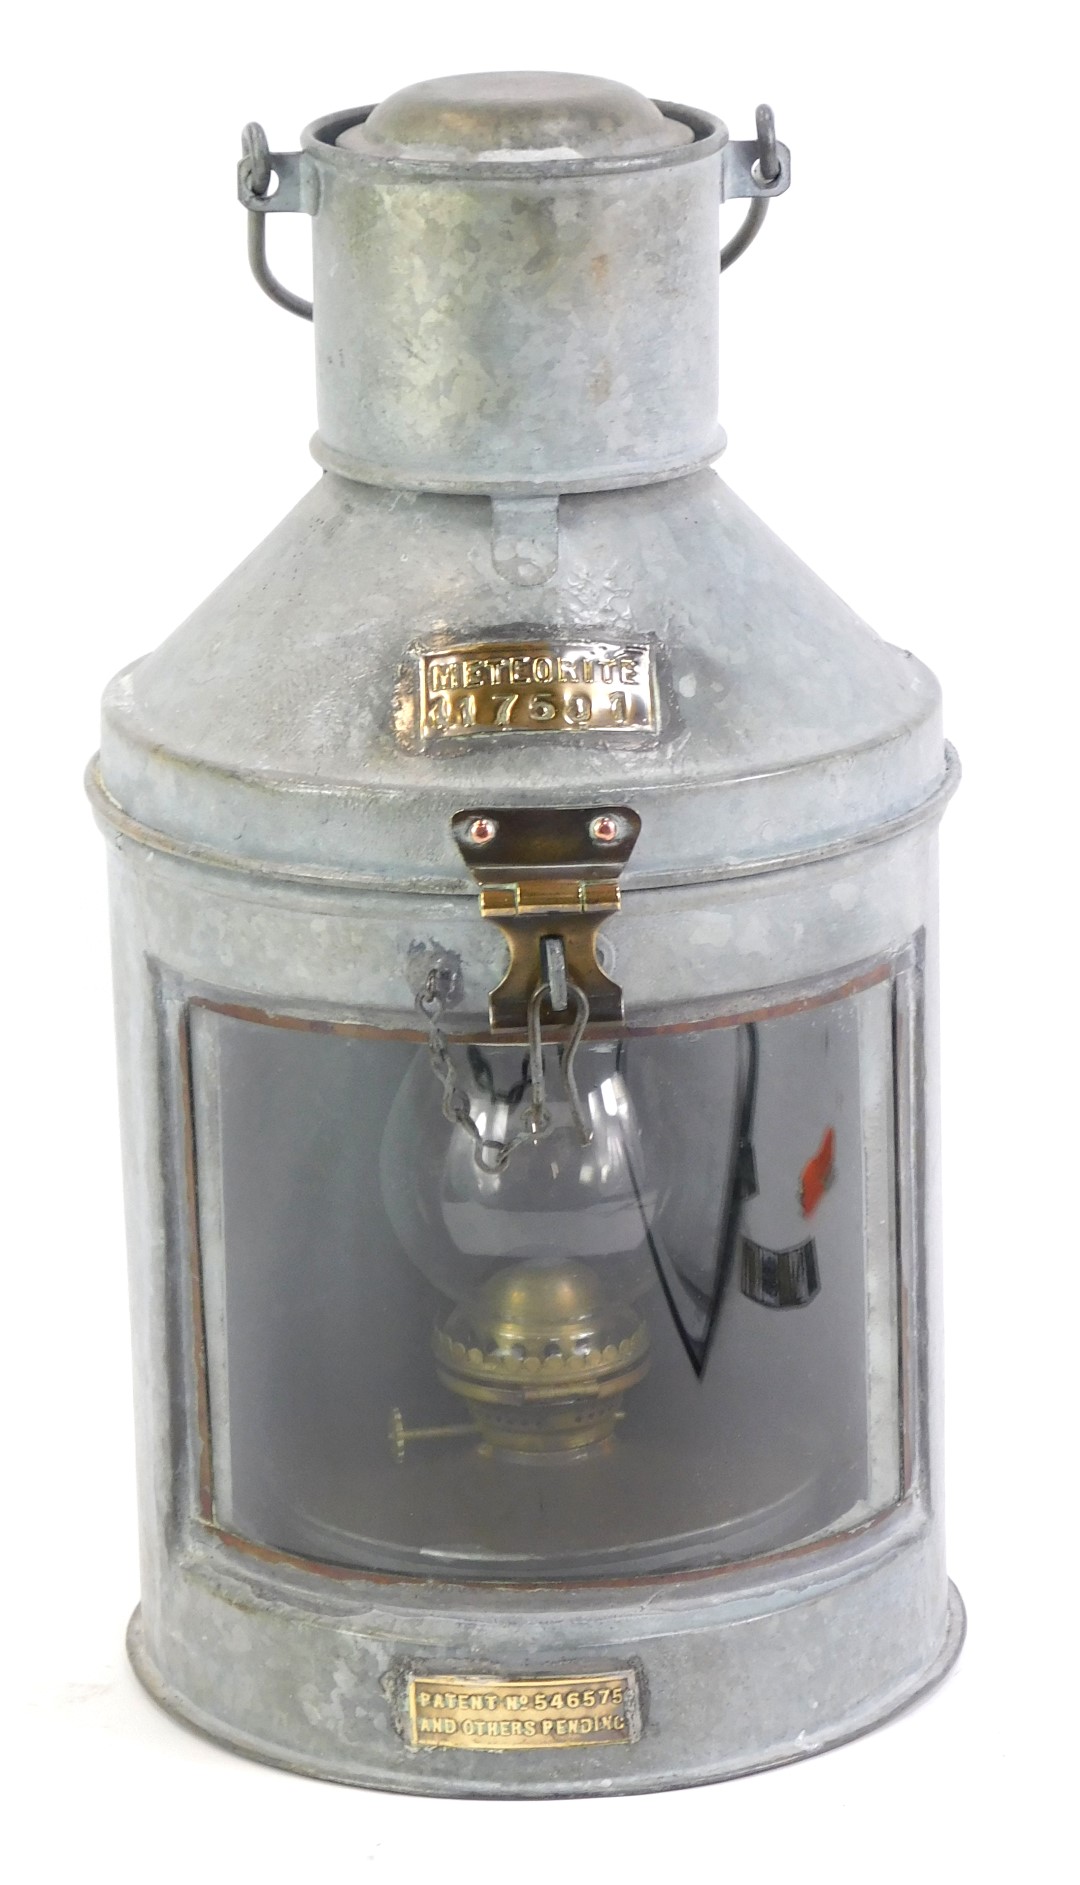 A steel Meteorite ship's lantern, numbered 117501, with brass patent plaque to base, with ring